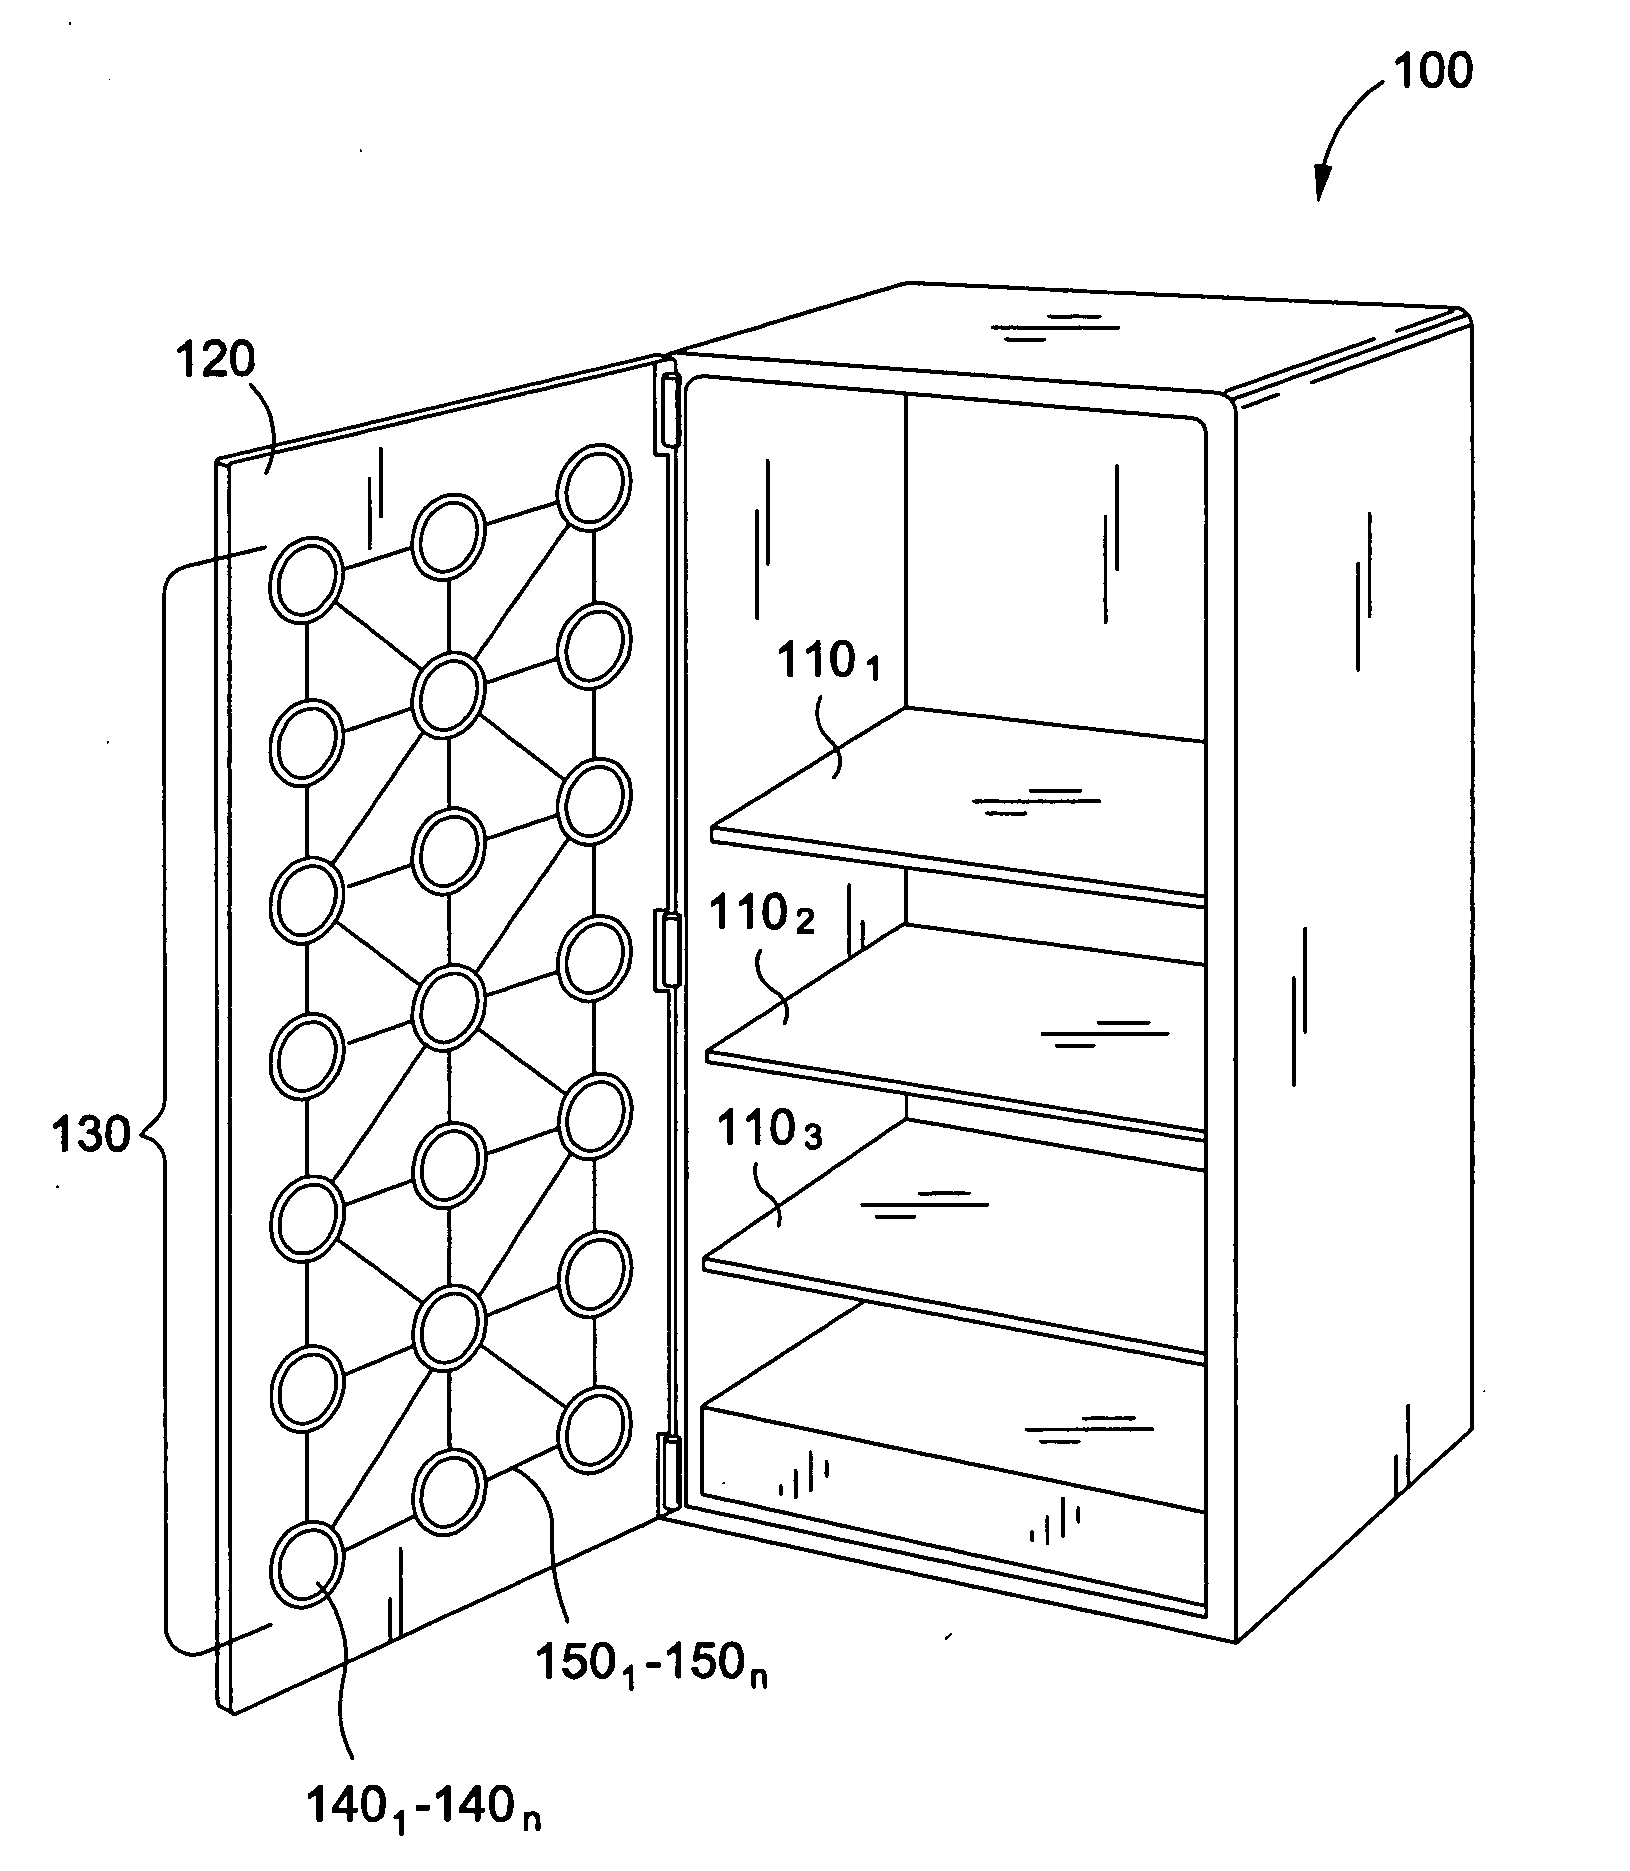 System and Method for Seamless Imaging of Appliance Interiors